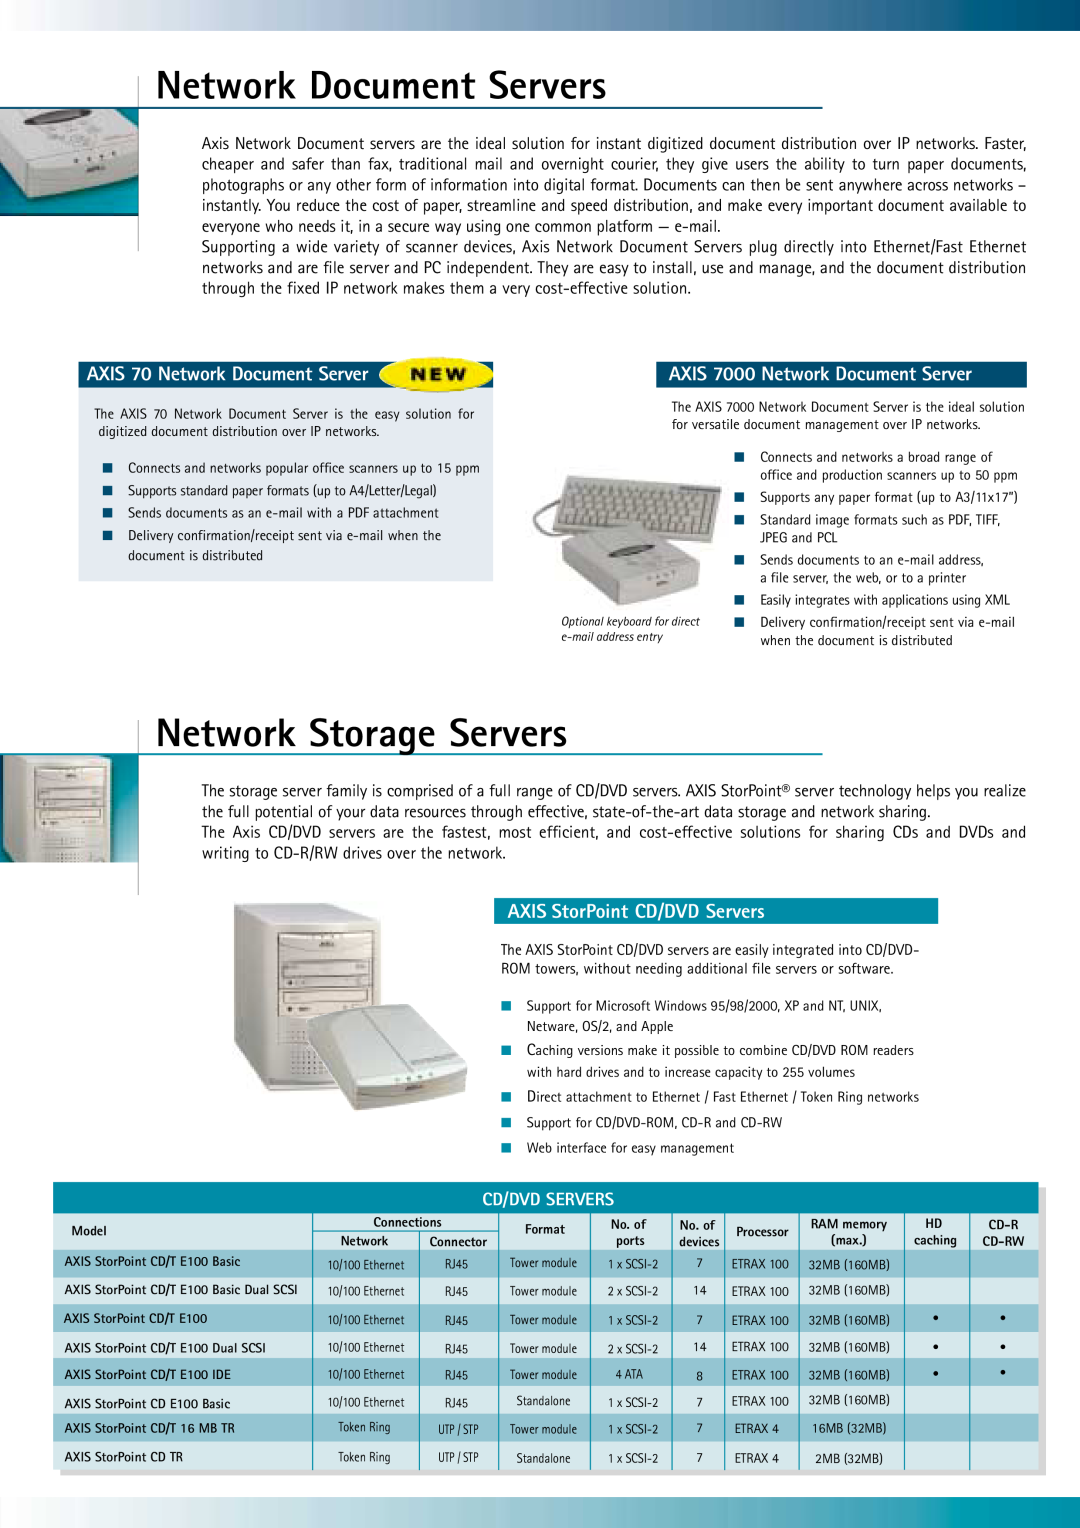 Axis Communications RJ45 manual Network Document Servers, Network Storage Servers, AXIS 70 Network Document Server 